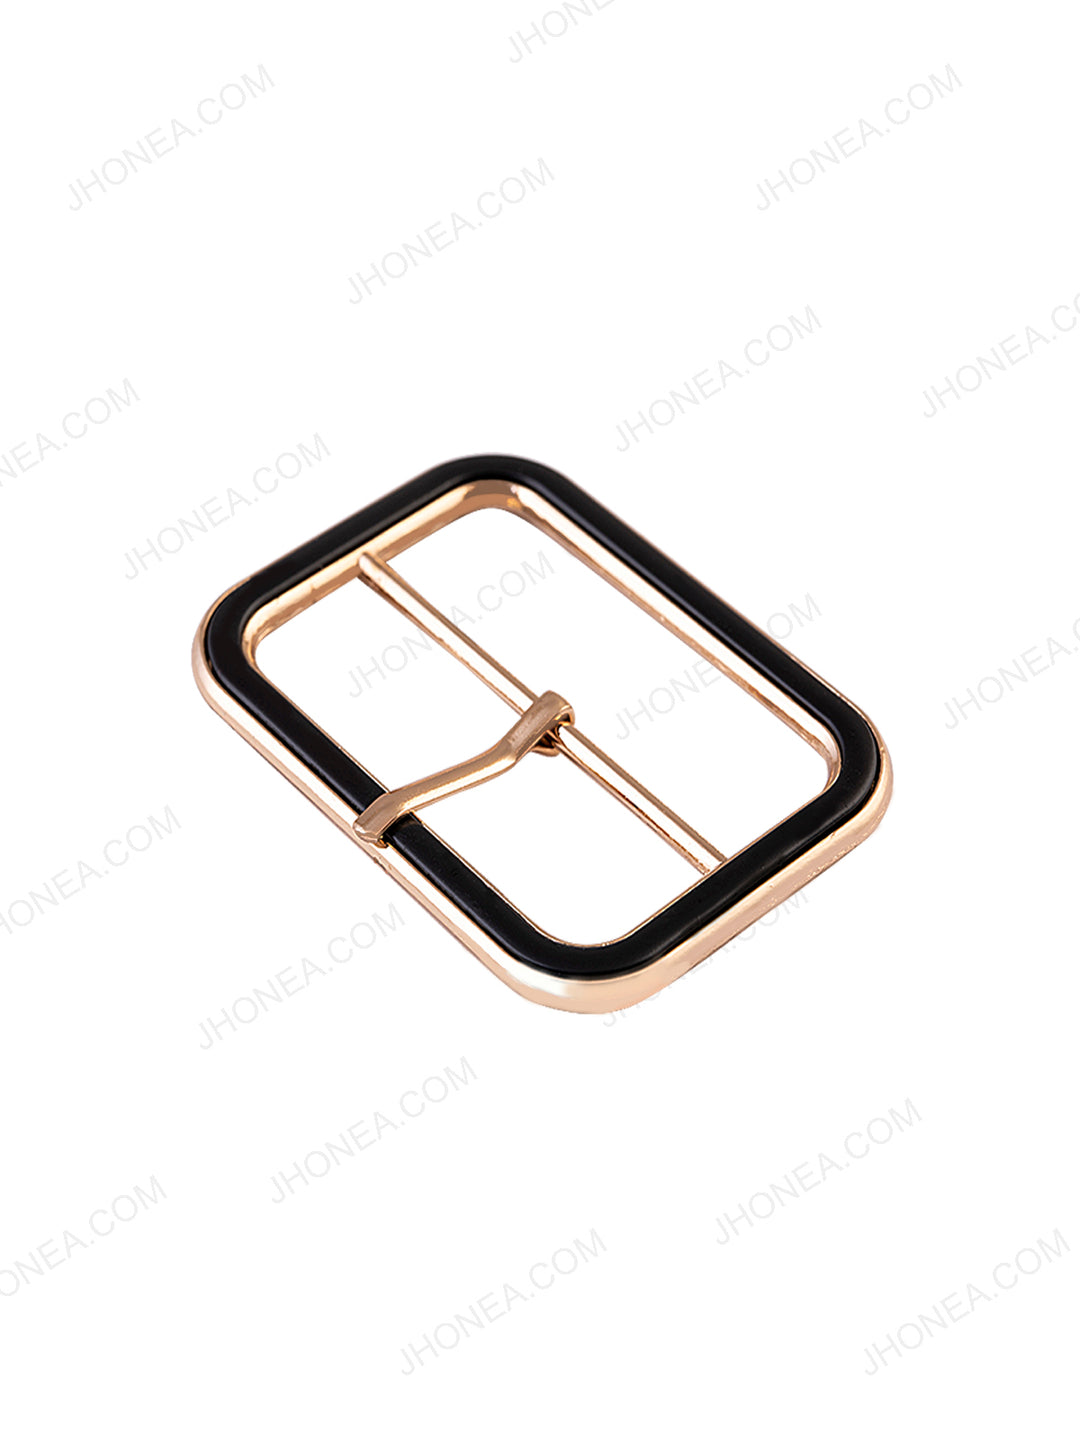 Shiny Gold with Black Sliding Belt Buckle with Prong